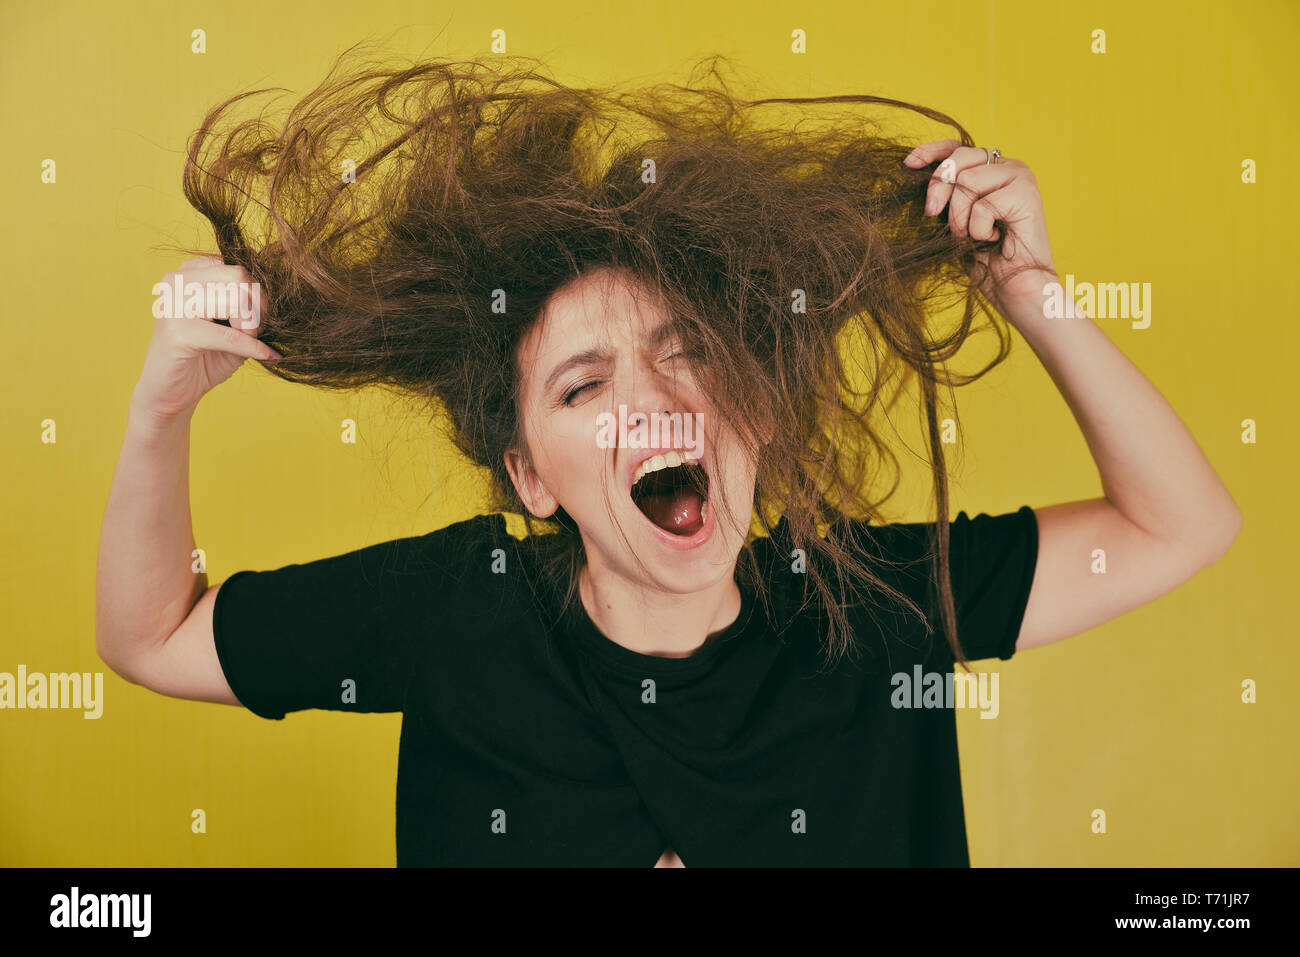 angry woman with a strange hair style  Stock Photo